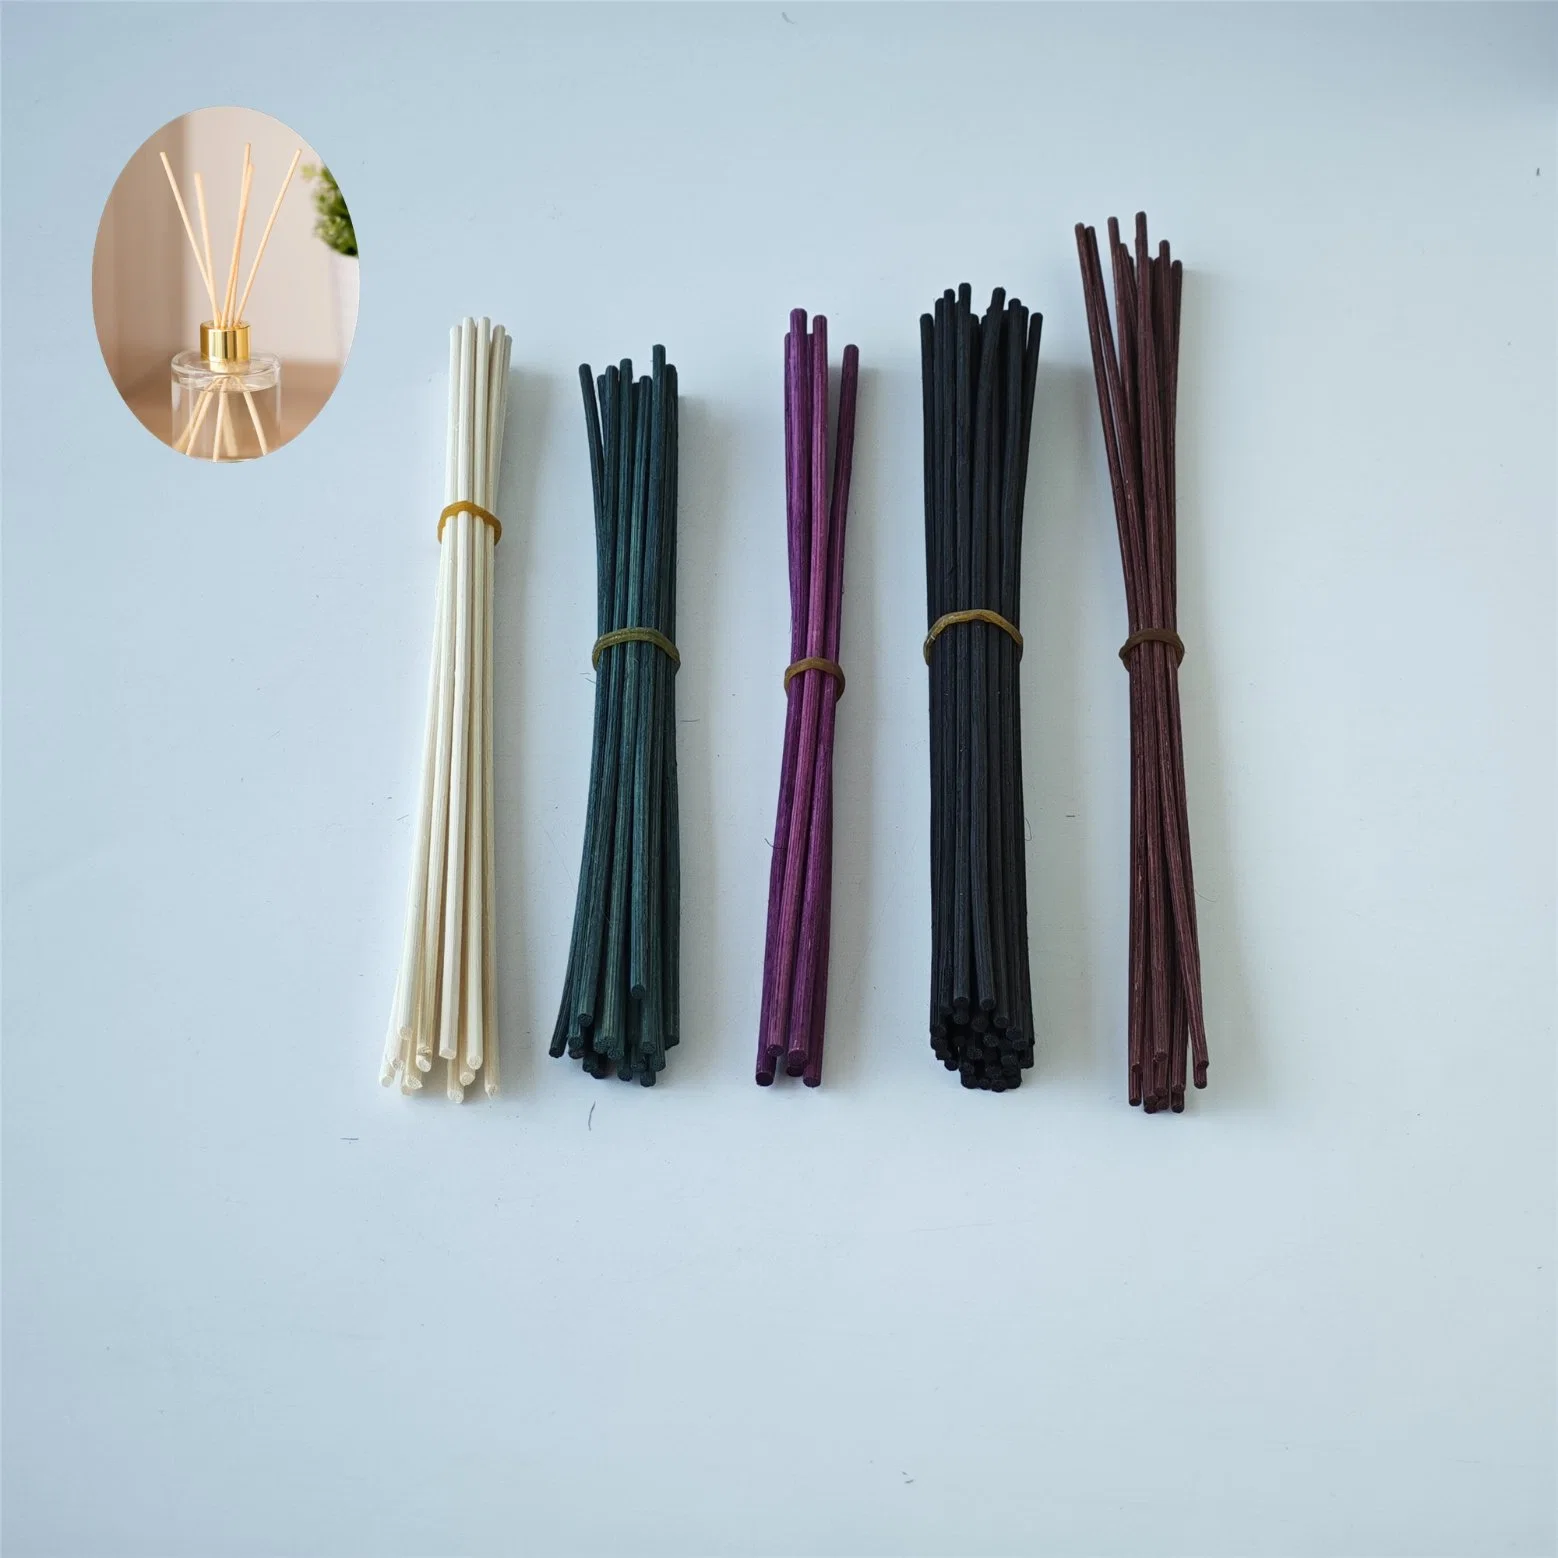 Colorful Black Air Freshener Fragrance Oil Reed Diffuser 3mm Rattan Stick